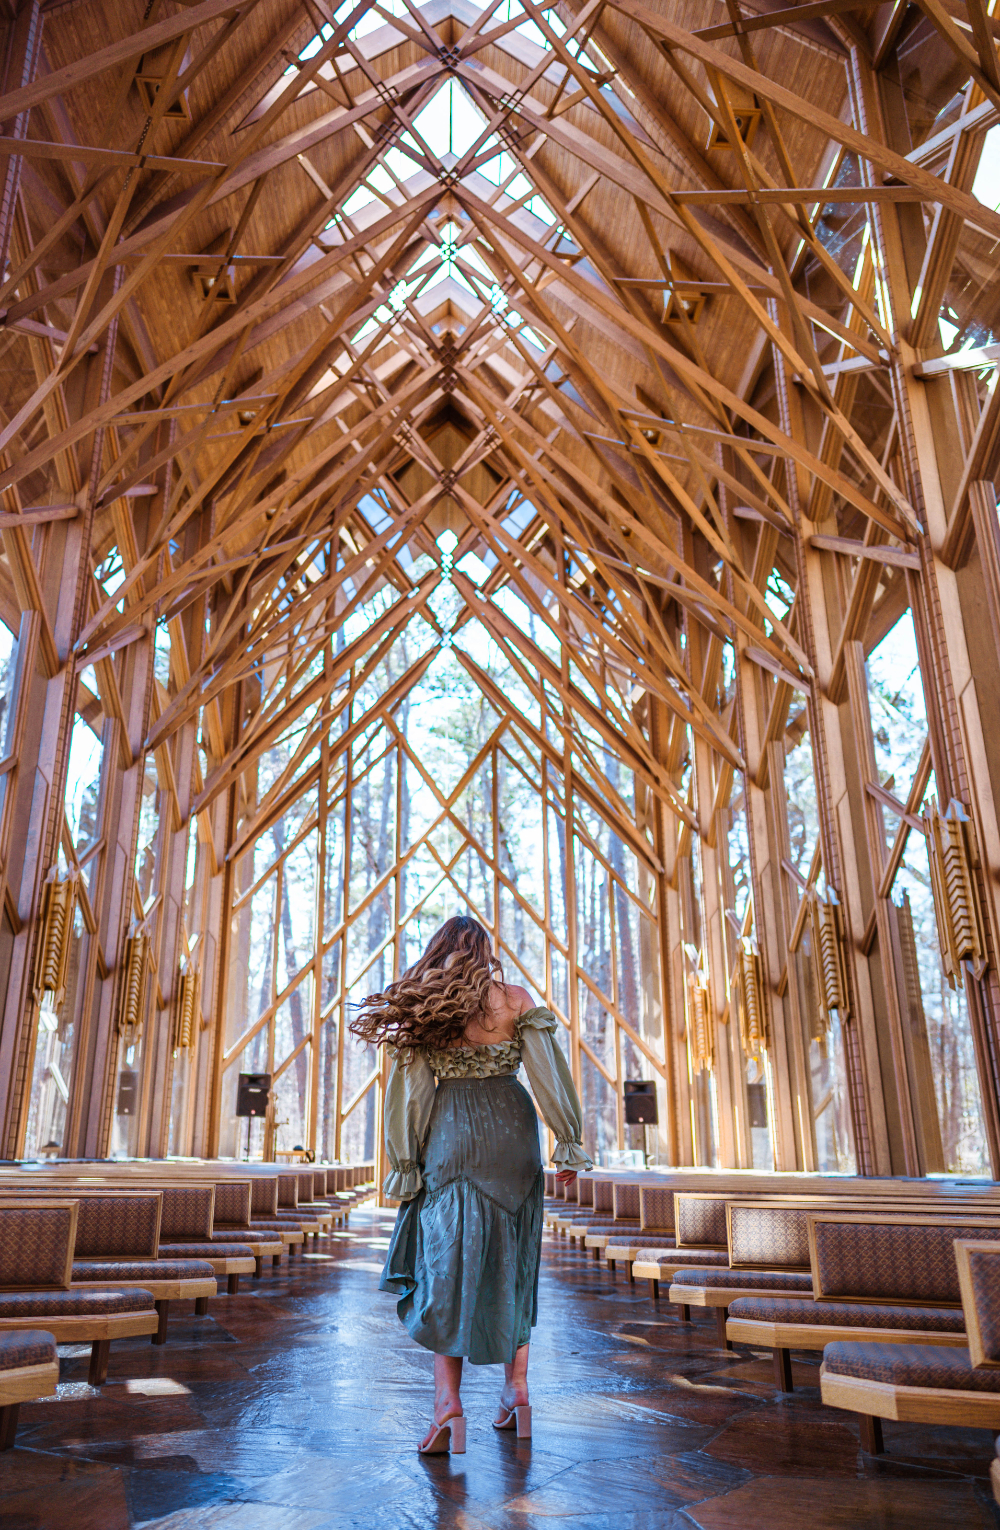 Anthony Chapel at Garvan Gardens with a woman sinning in a skirt near the pews |10 Hot Springs Arkansas Locations You Need To Visit